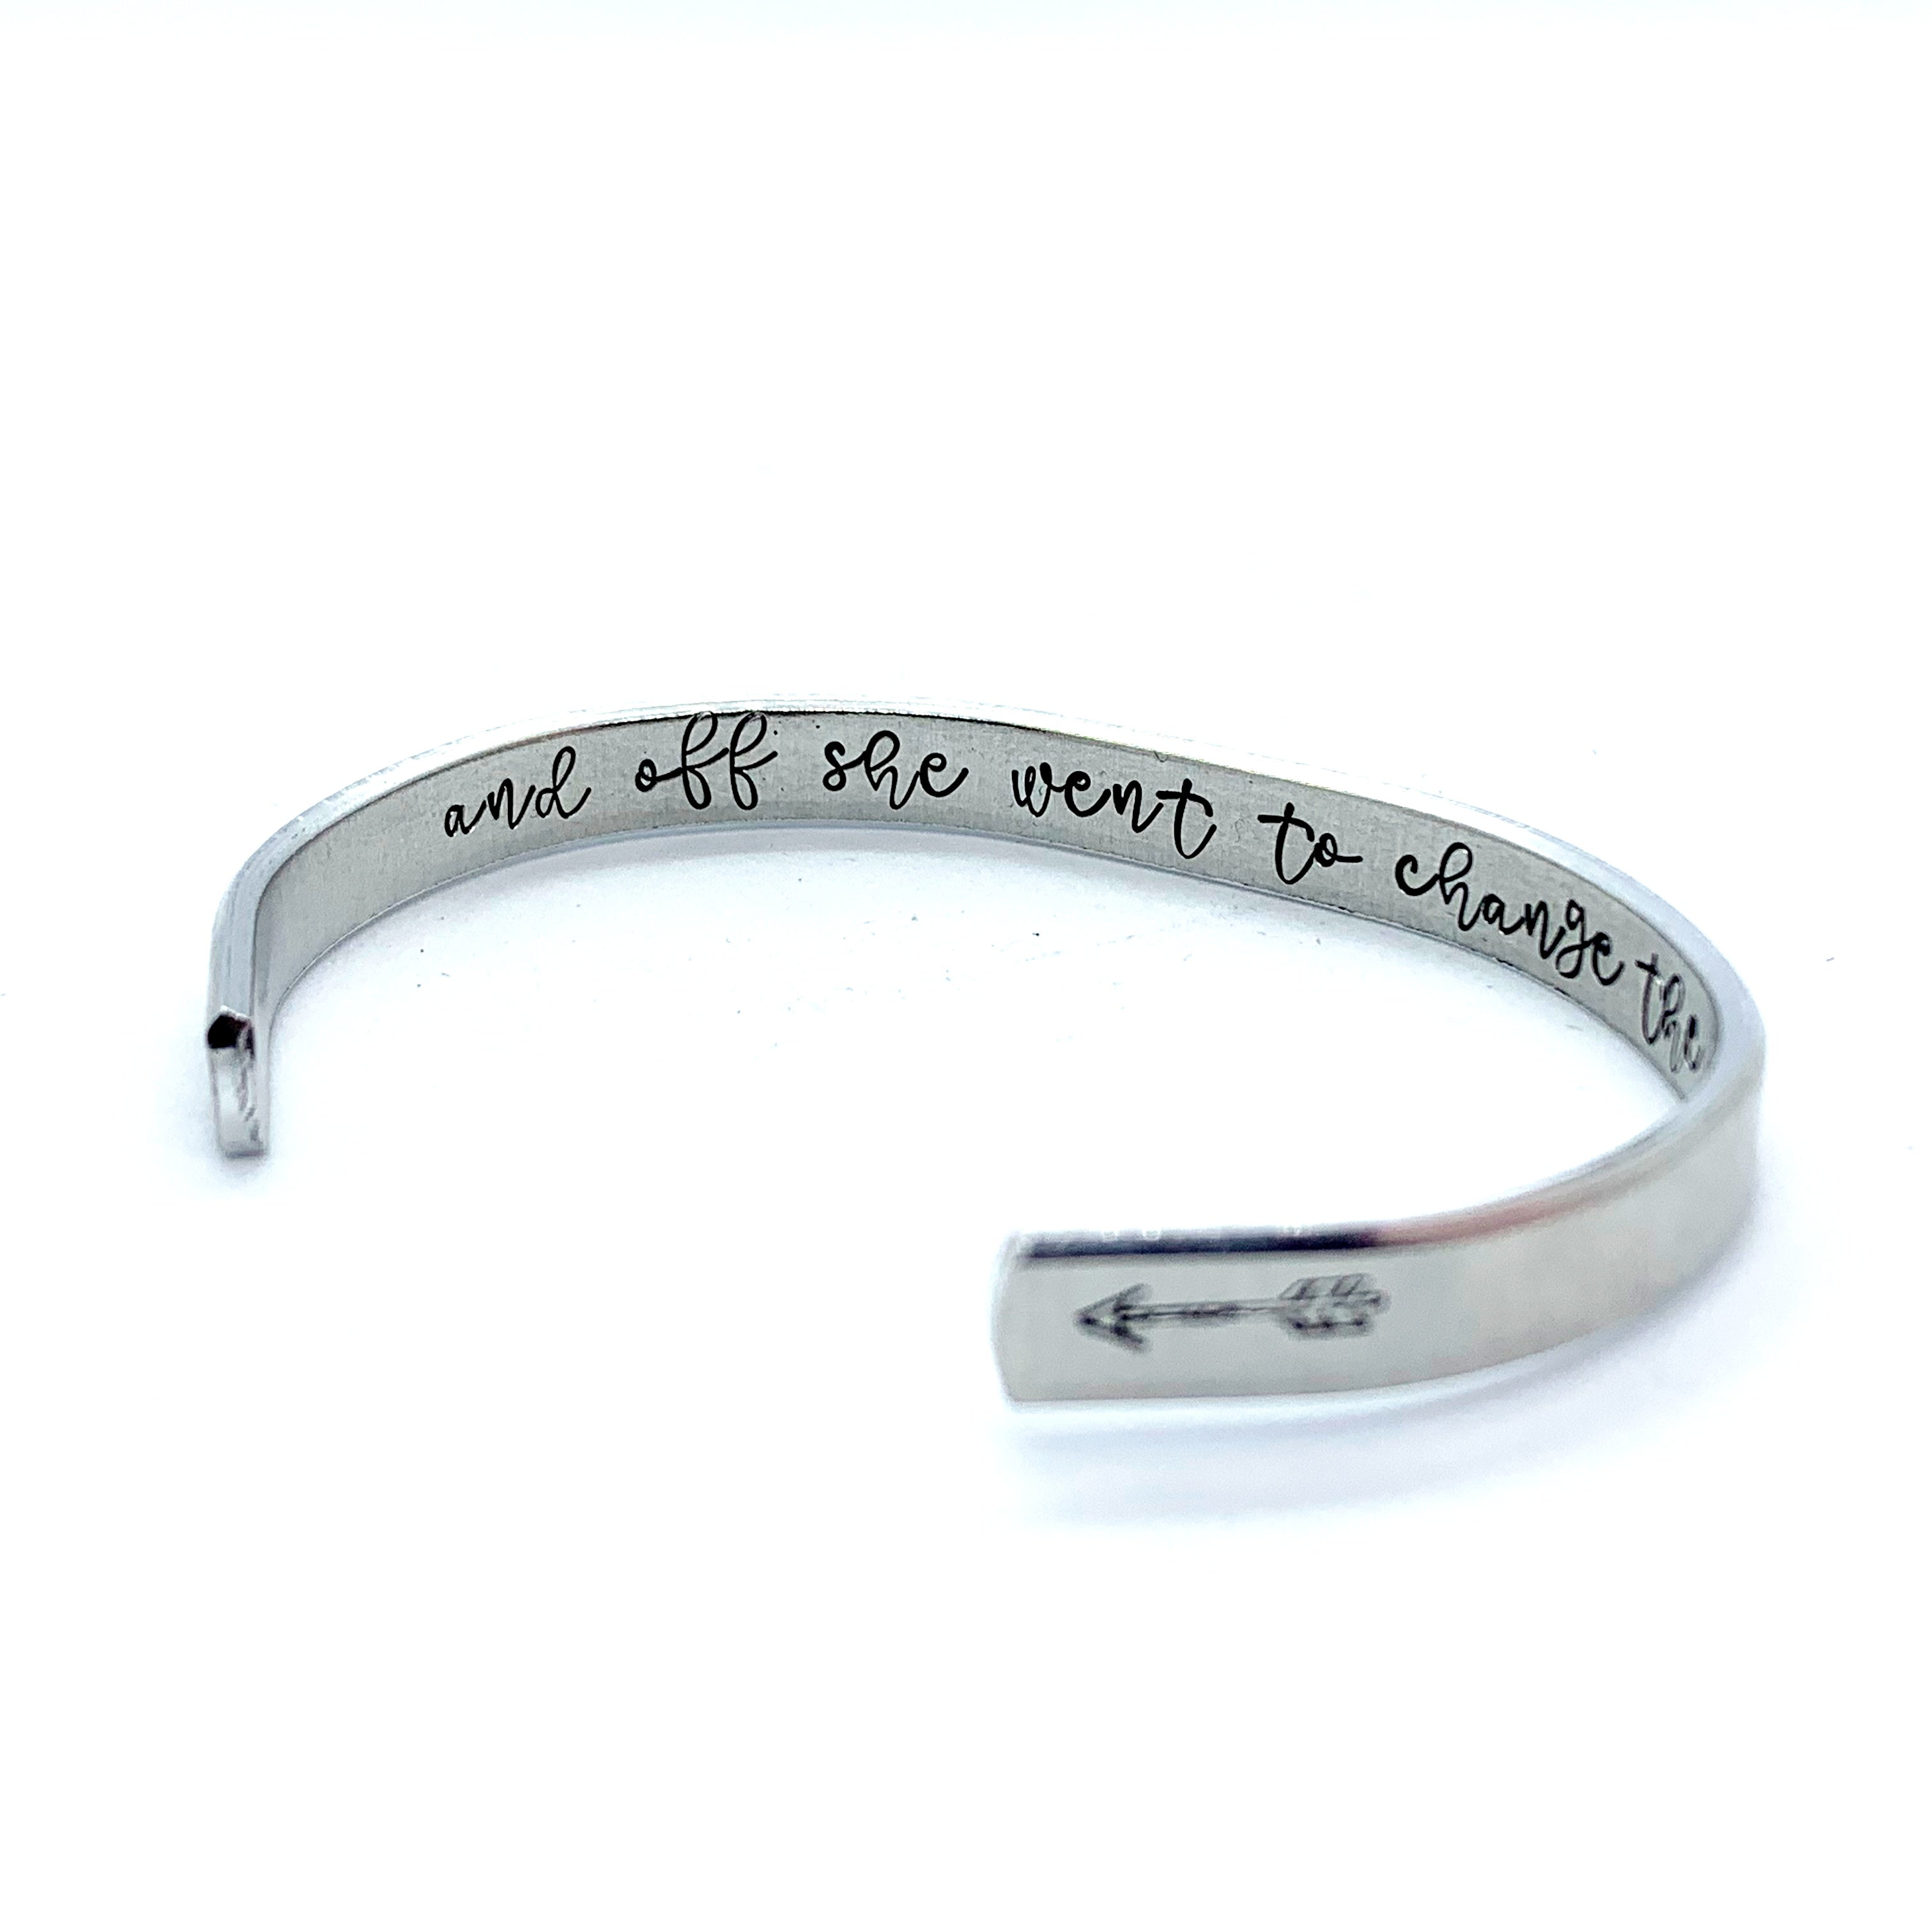 ¼ inch Aluminum Cuff -  (inside) And Off She Went To Change The World